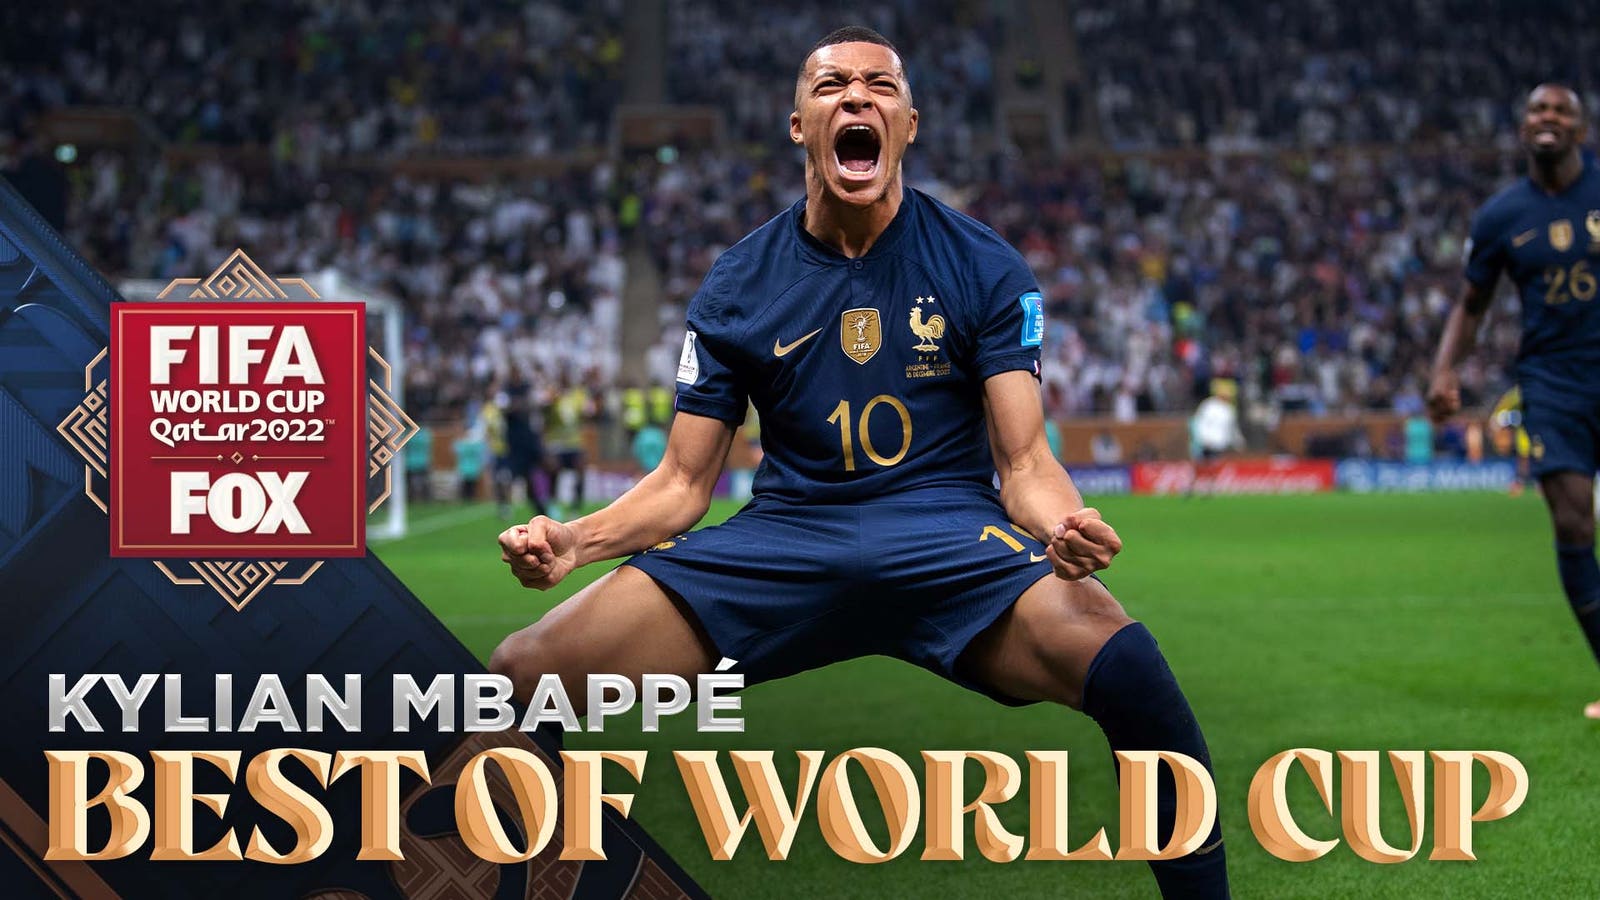 Kylian Mbappe's best moments for France at the 2022 FIFA World Cup